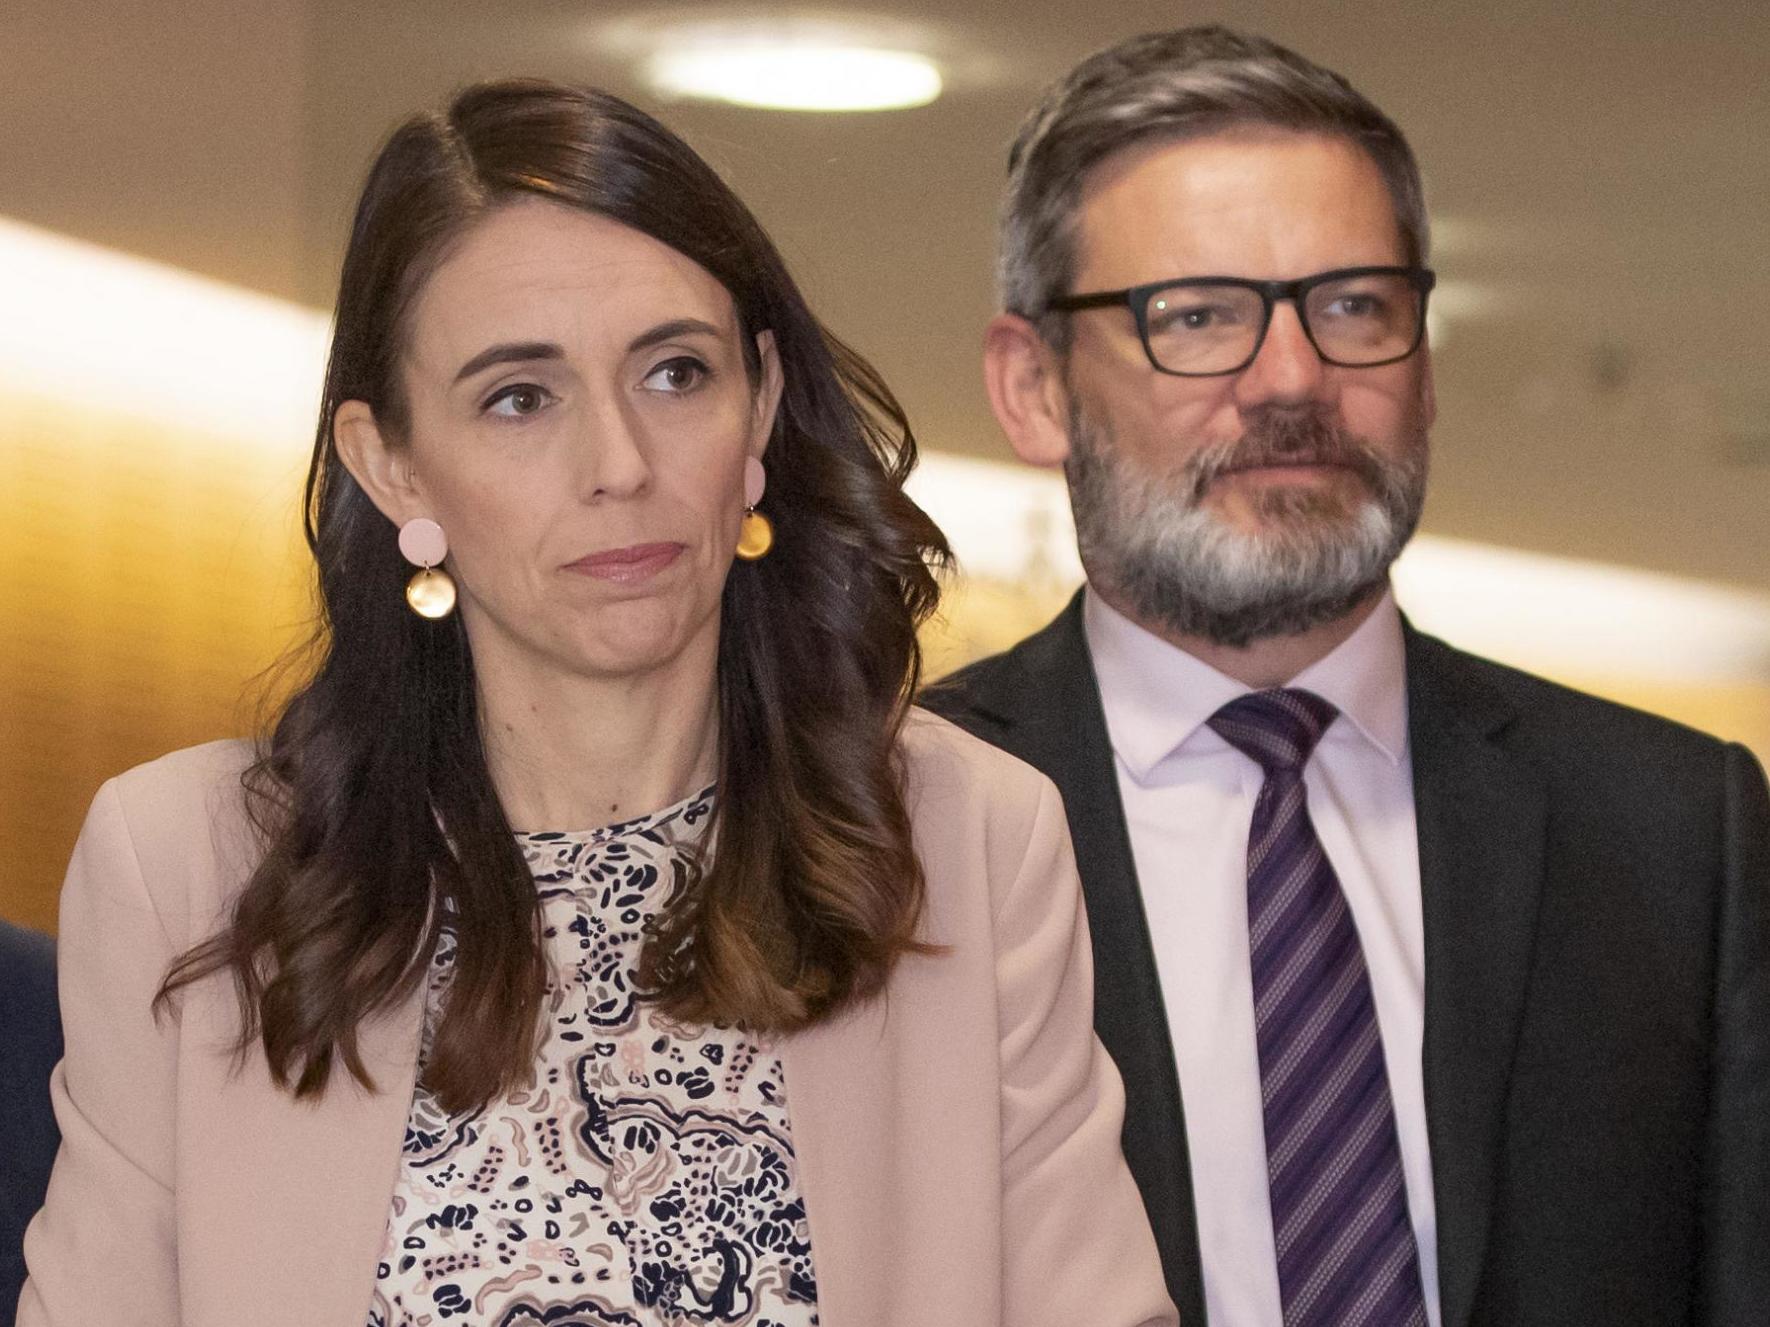 Jacinda Ardern, New Zealand's prime minister, with Iain Lees-Galloway earlier in the month